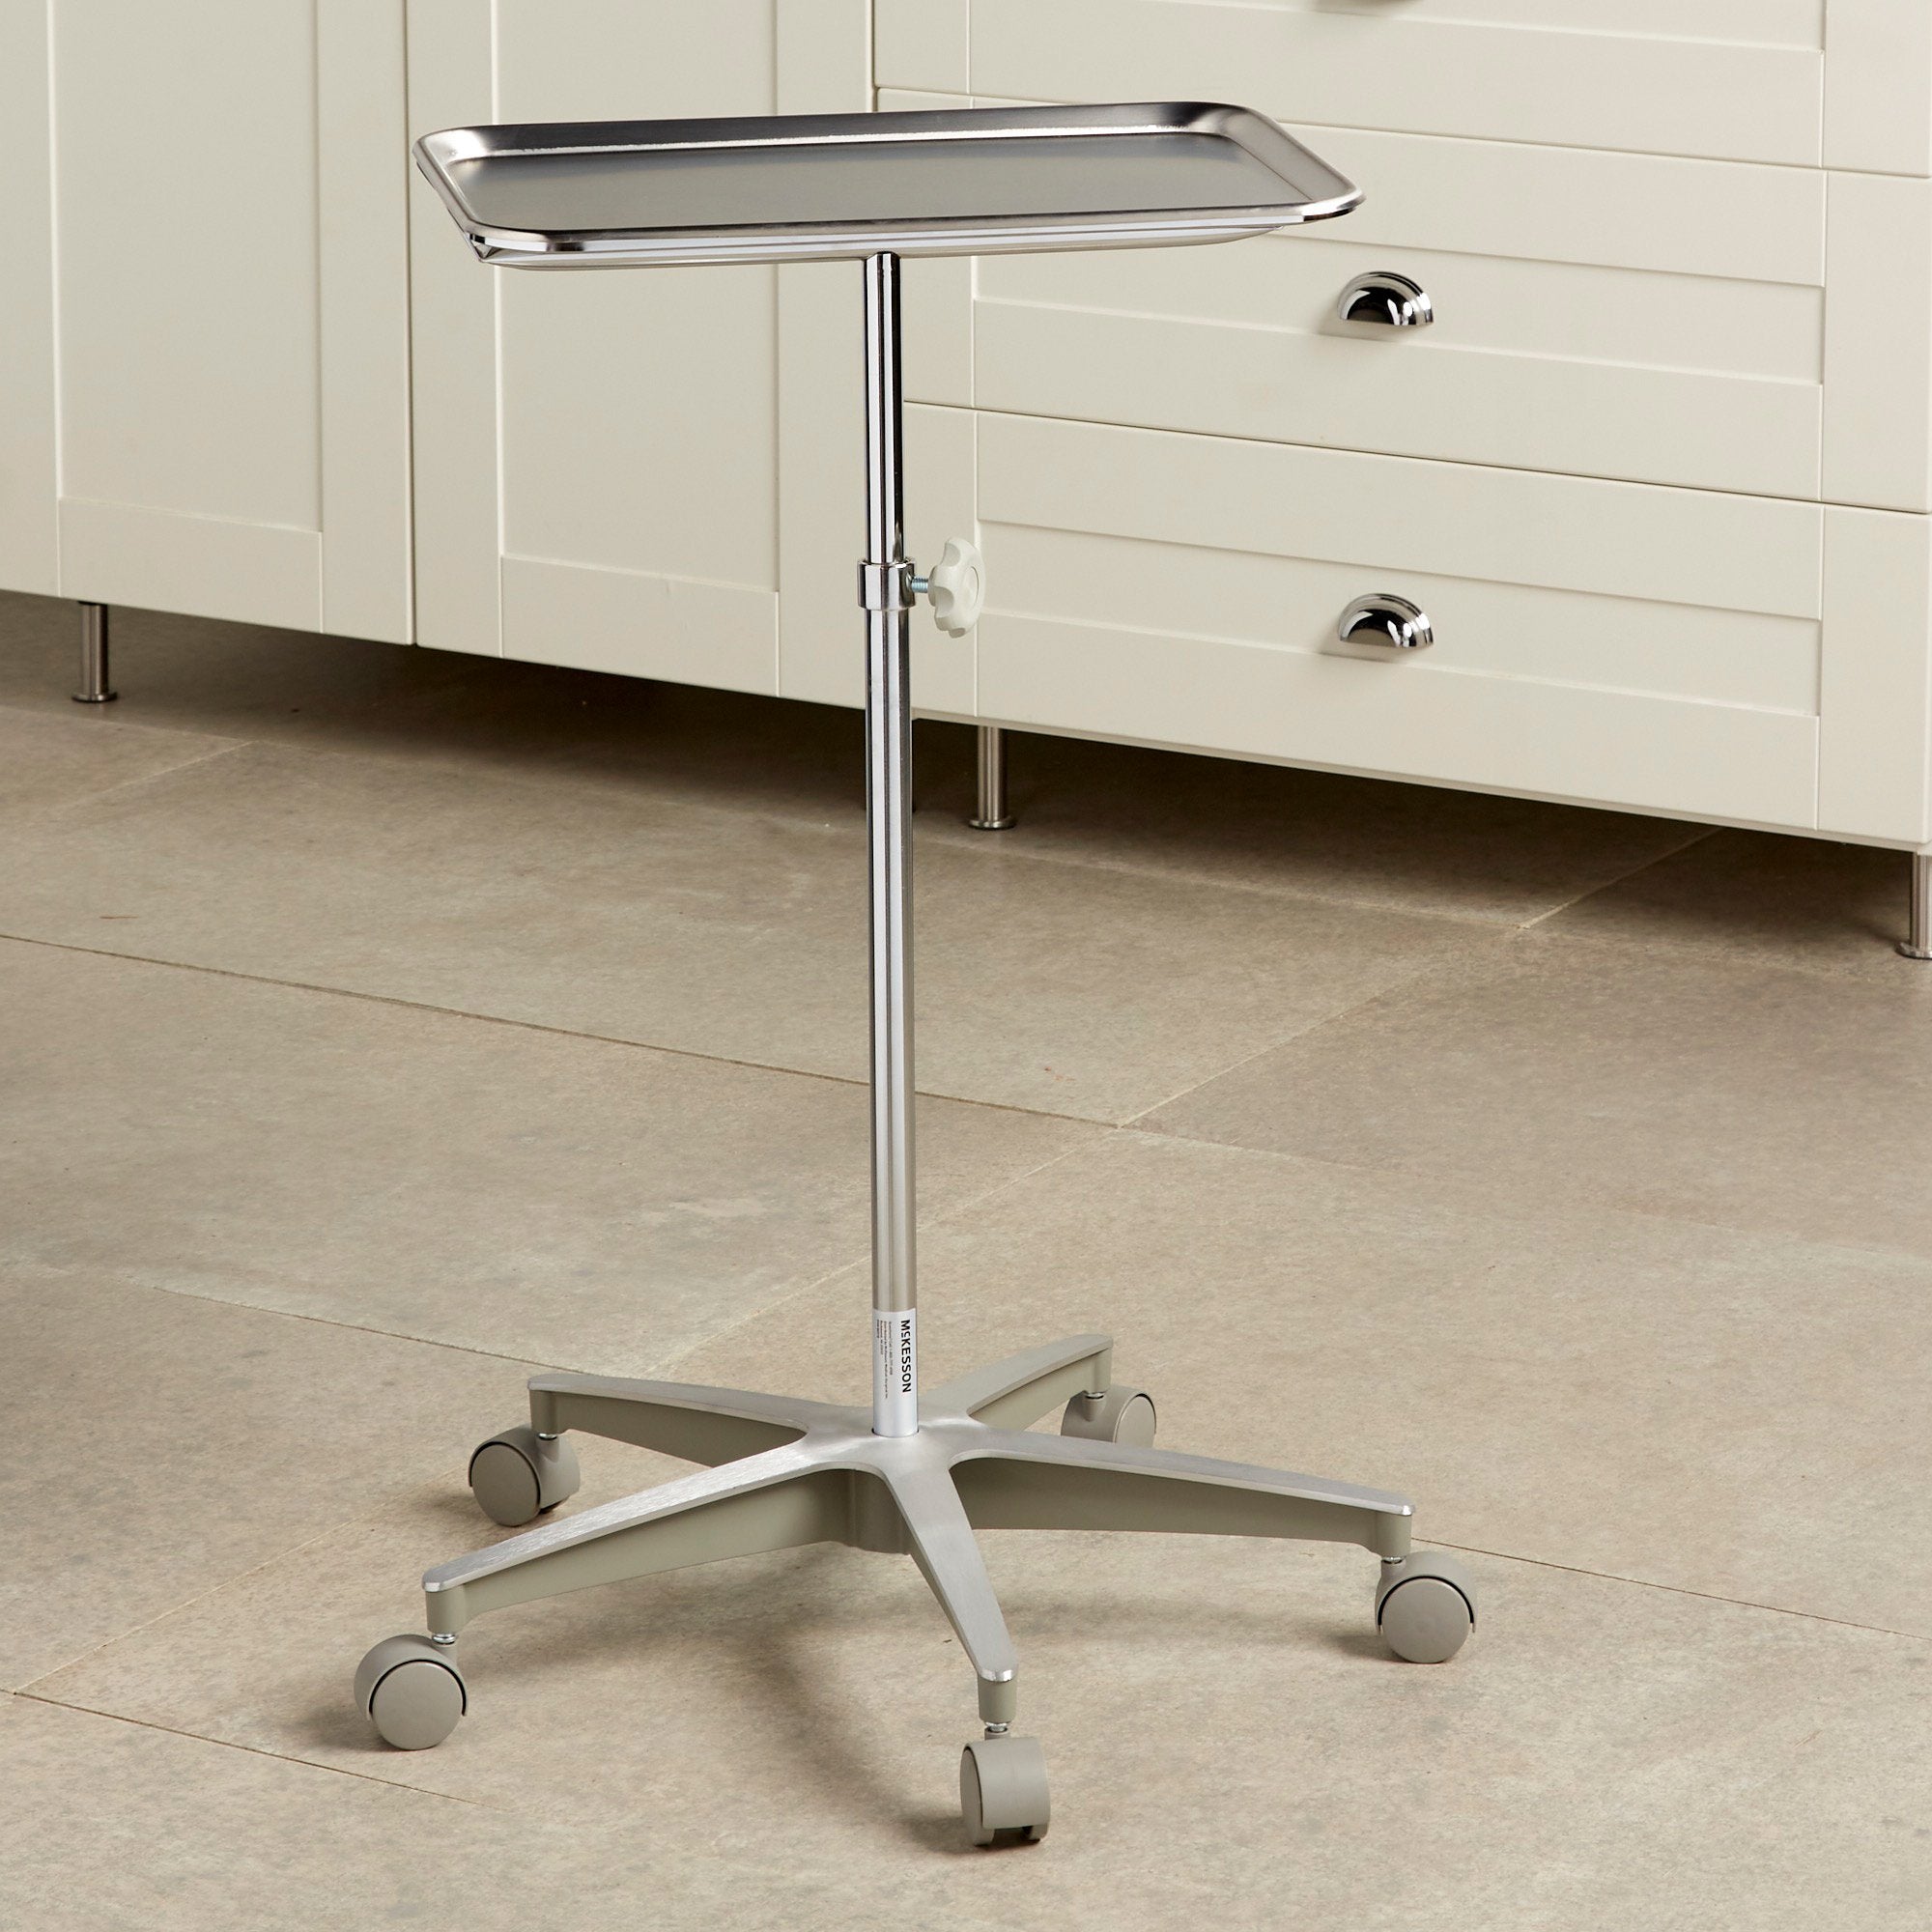 Instrument Stand McKesson 5 lbs. Tray Five Leg Base 29.25 - 48.75 Inch 12.62 X 19.25 X 0.75 Inch